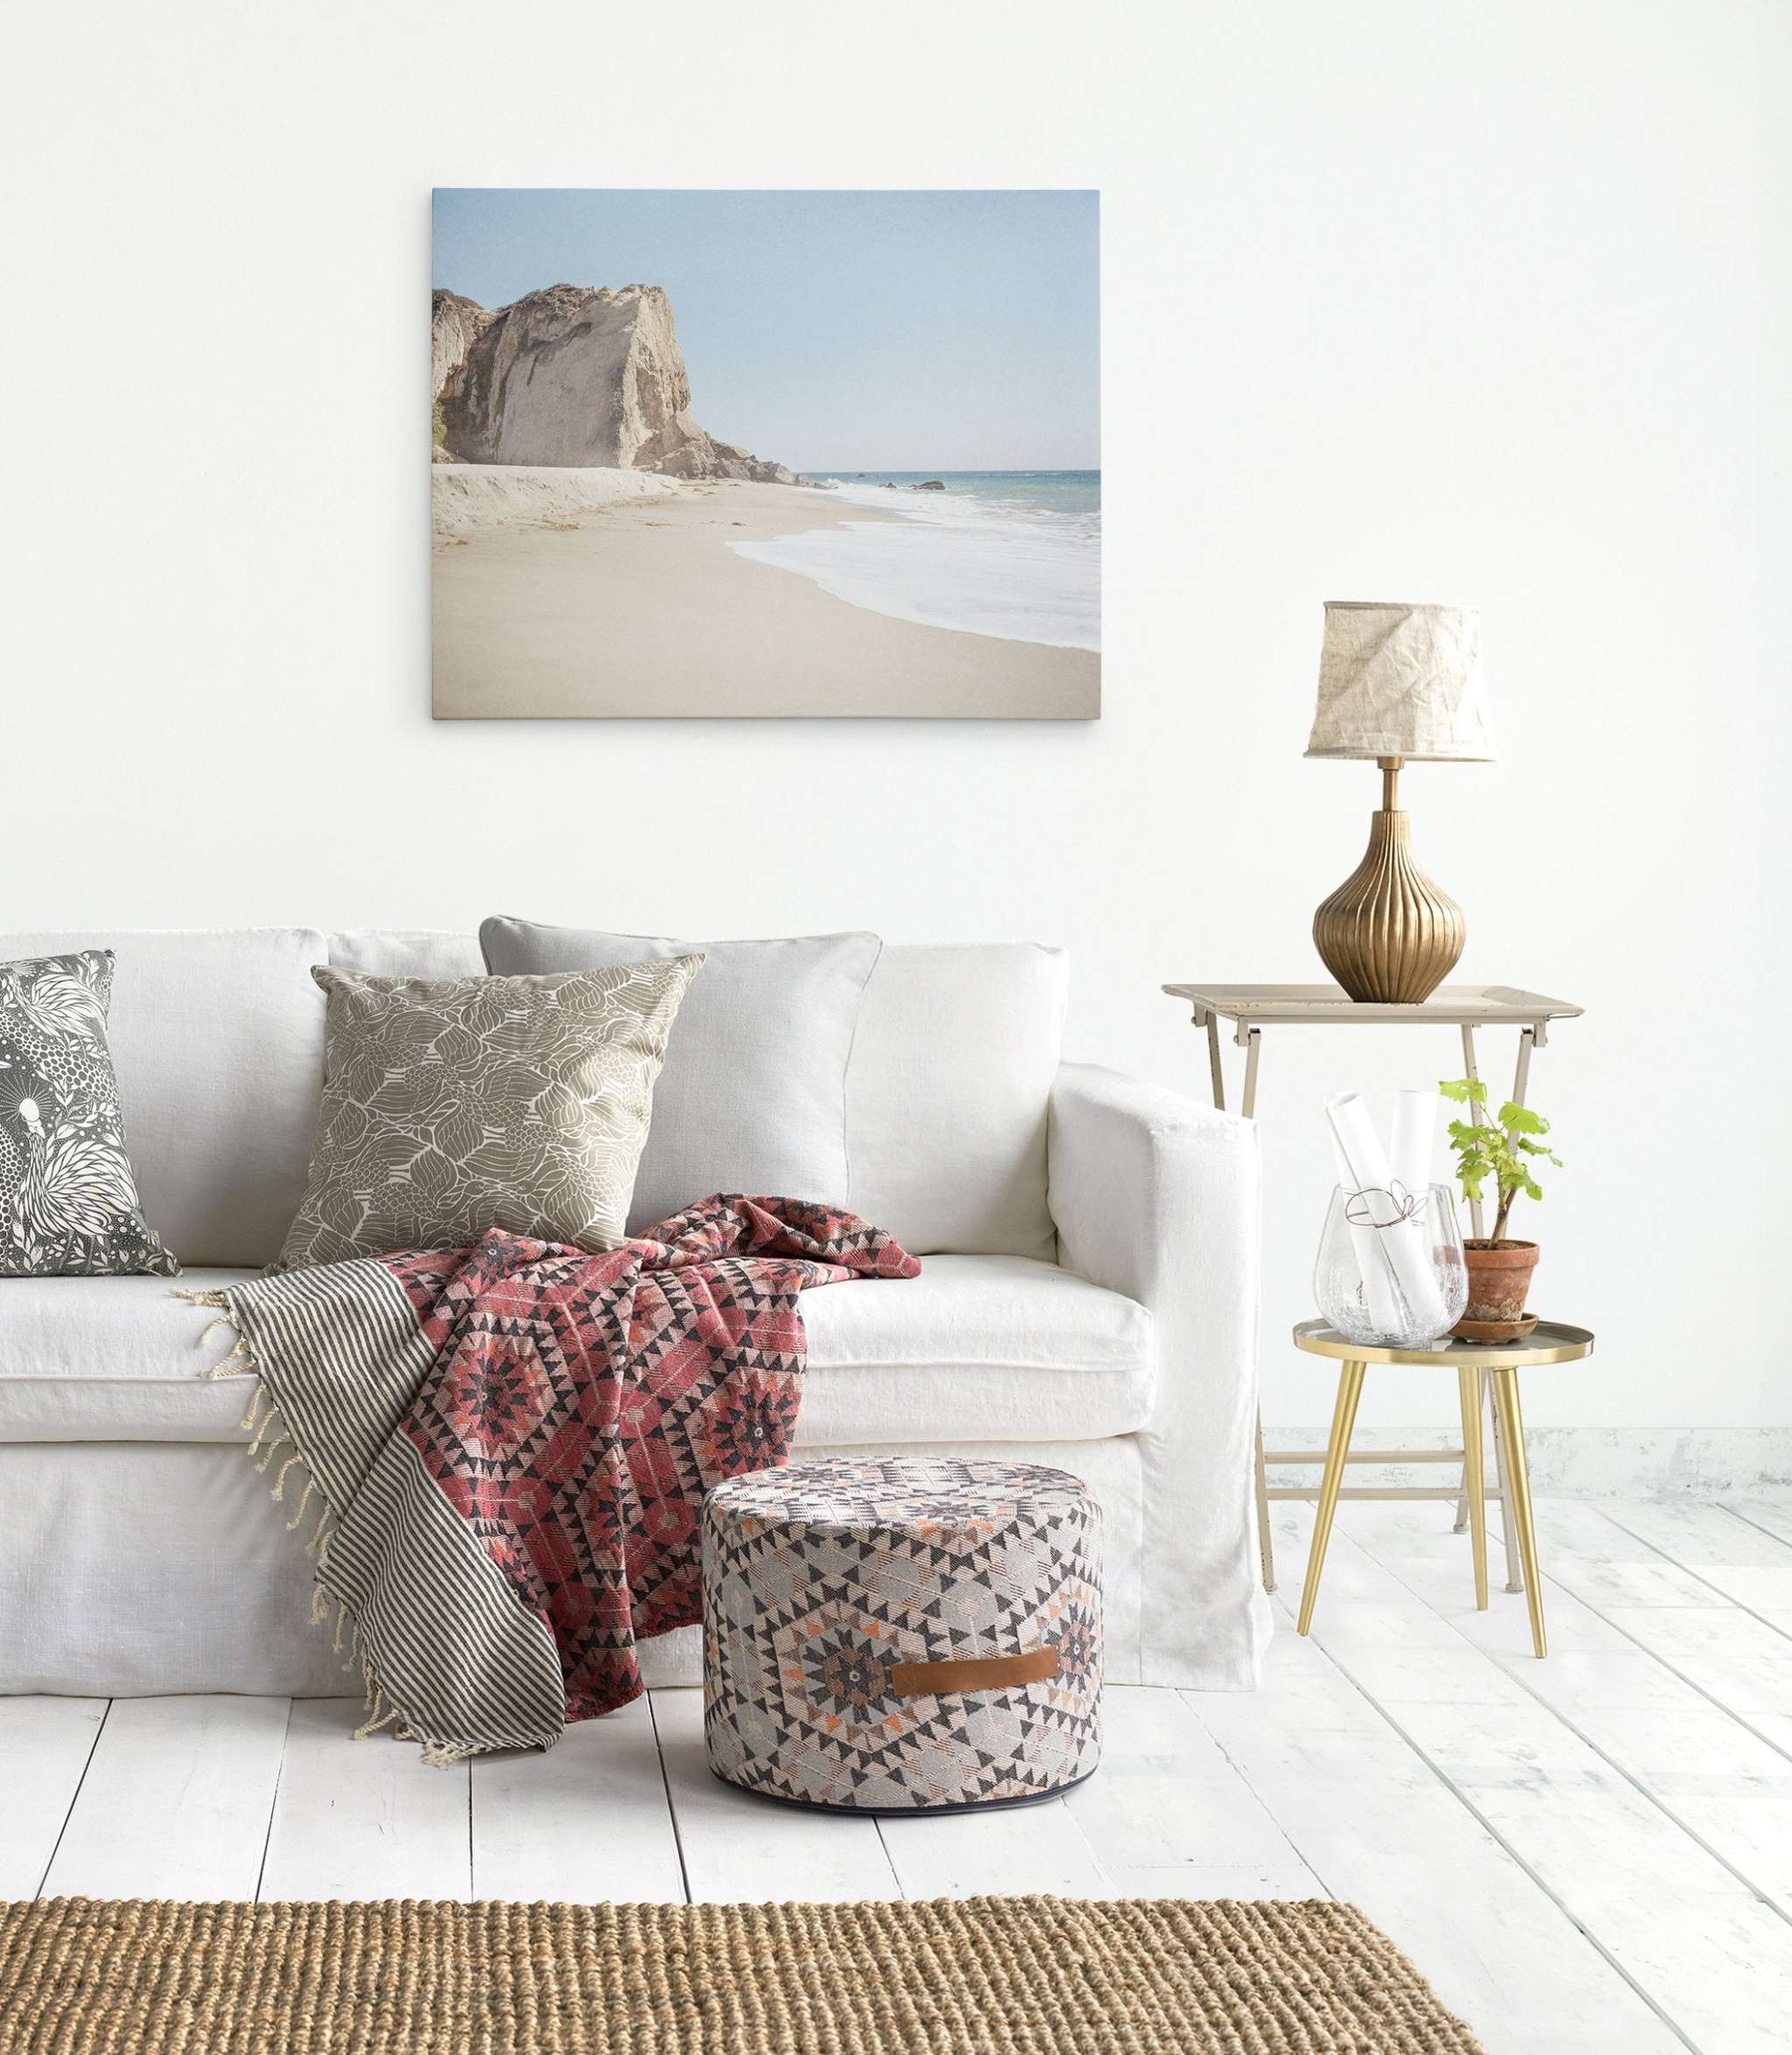 A cozy, light-filled living room features a white sofa adorned with patterned cushions and a red, geometric throw. An Offley Green California Malibu Canvas Wall Art, &#39;Point Dume&#39; hangs on the white wall above. A small side table with a plant and vase, and a patterned pouf complete the decor.